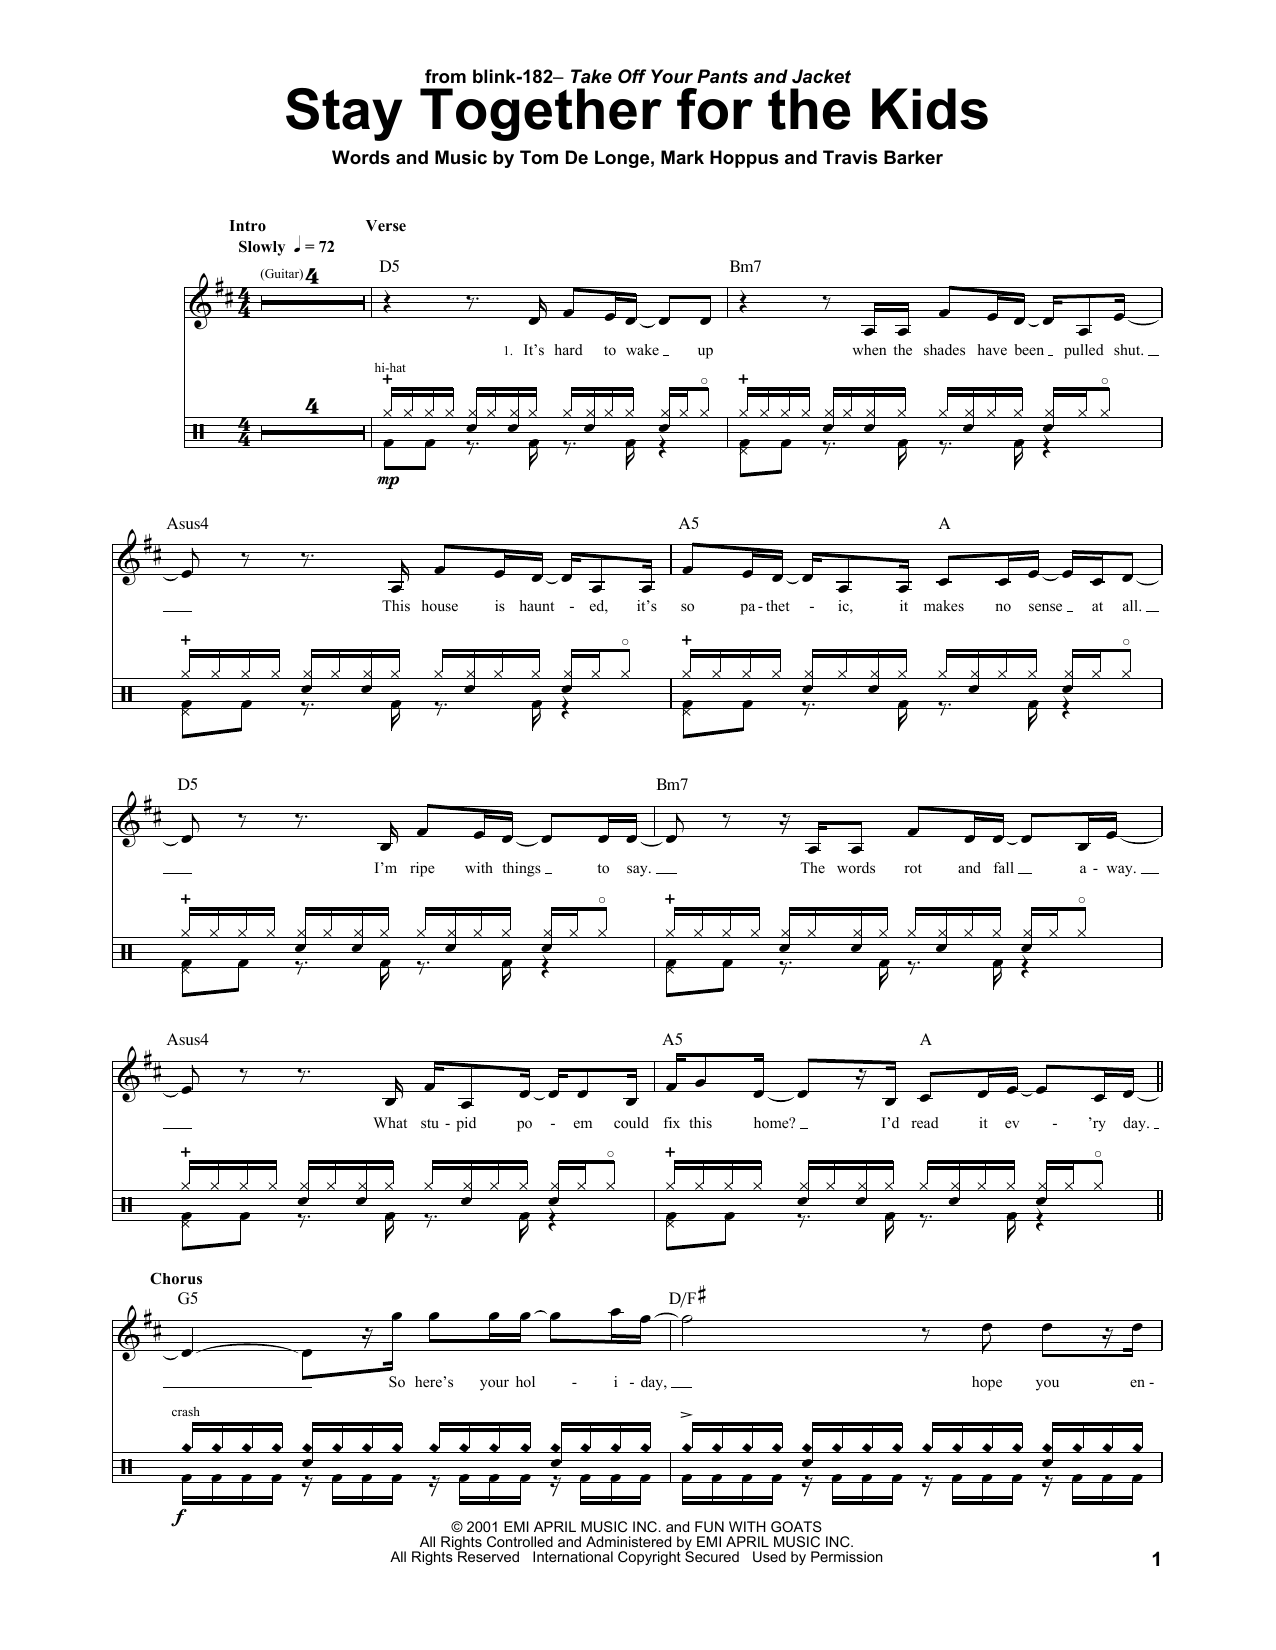 Blink 182 "Stay Together For The Kids" Sheet Music Notes, Chords